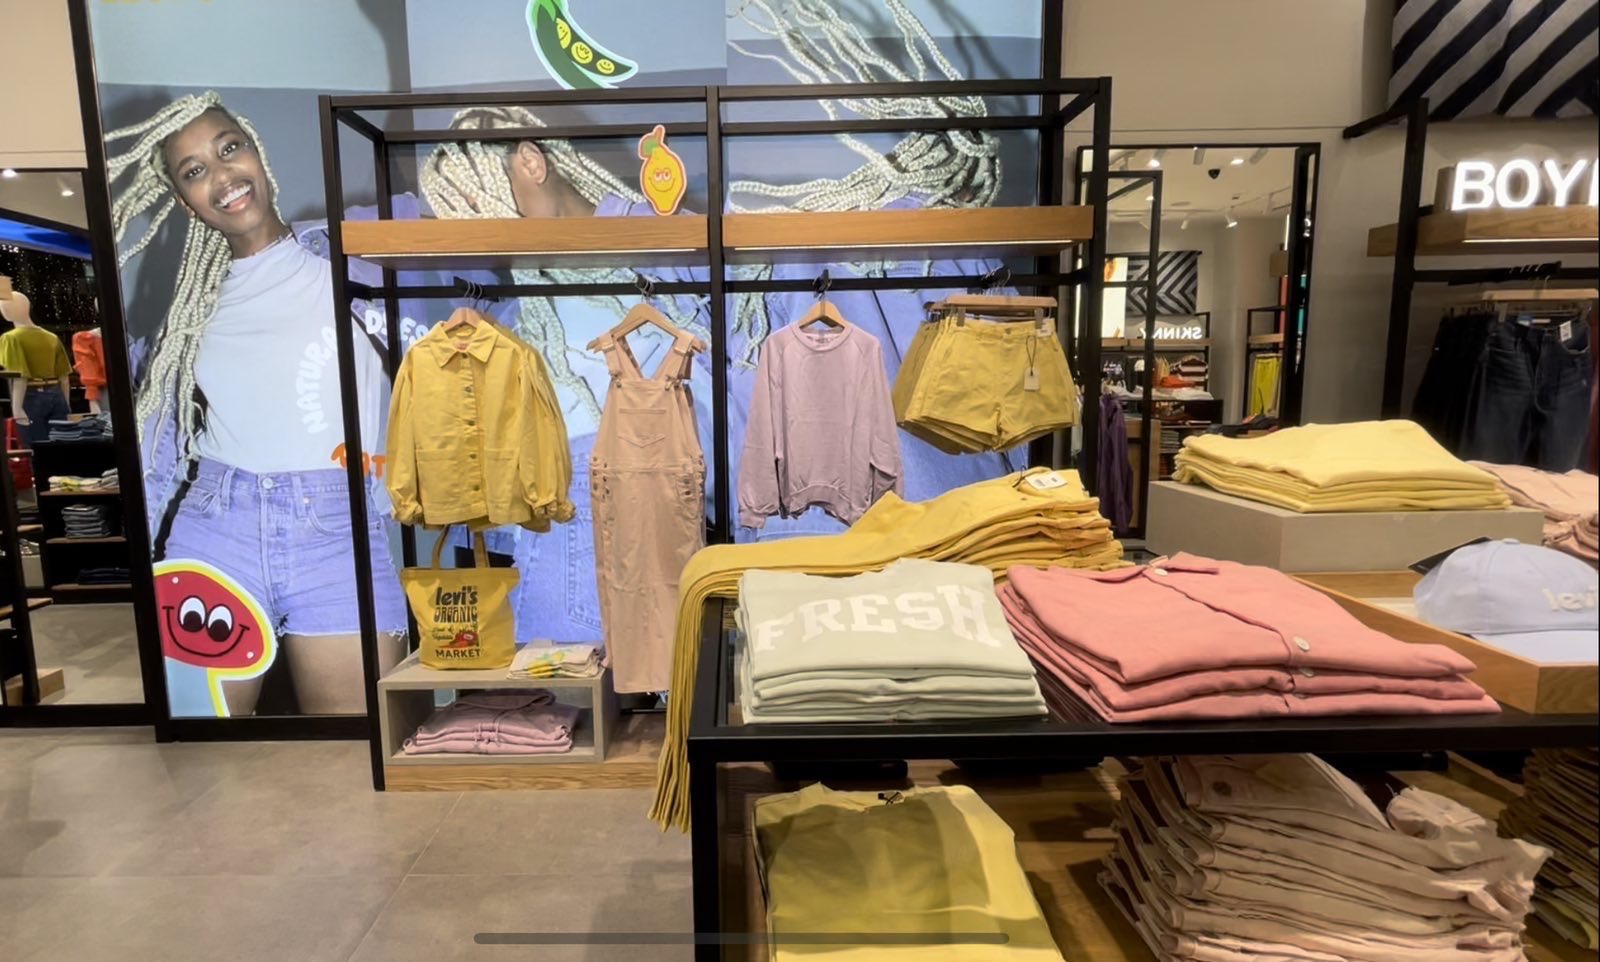 Find the Perfect Pair of Jeans at the New Levi's Branch in Cebu 